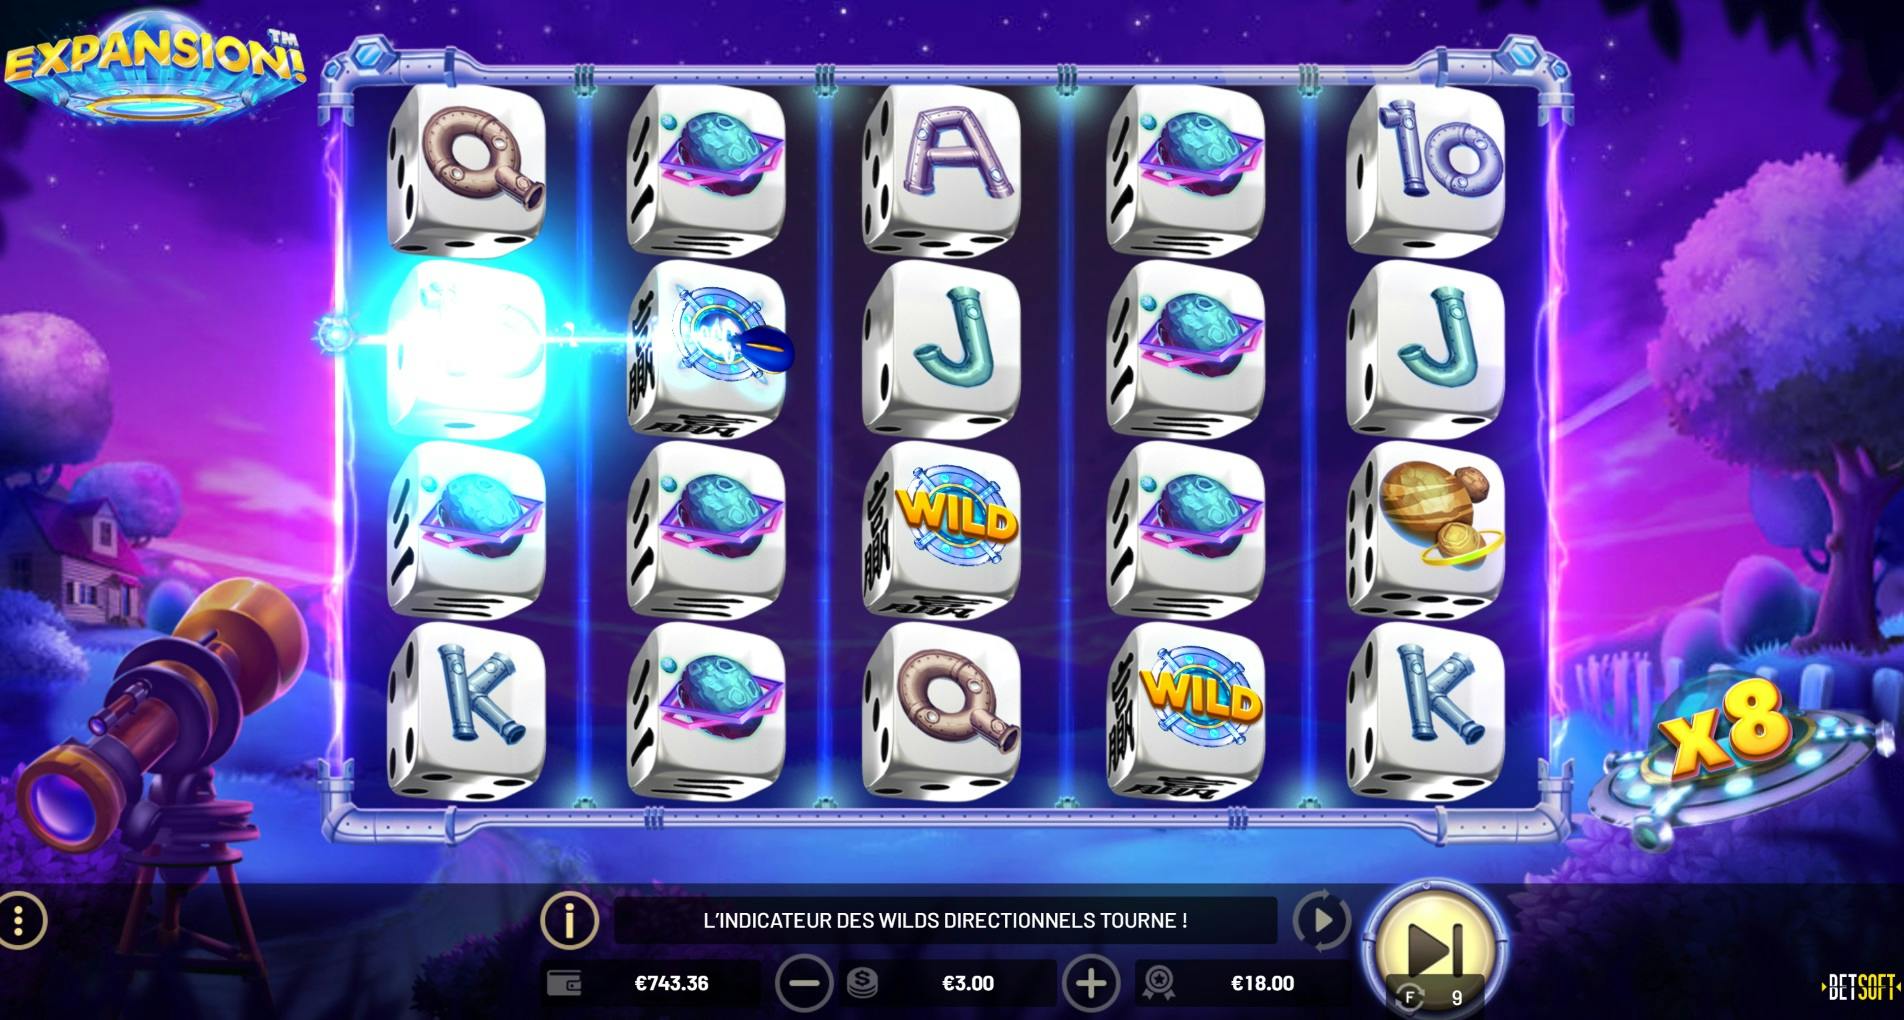 Betsoft Expansion dice slot filled with exploration